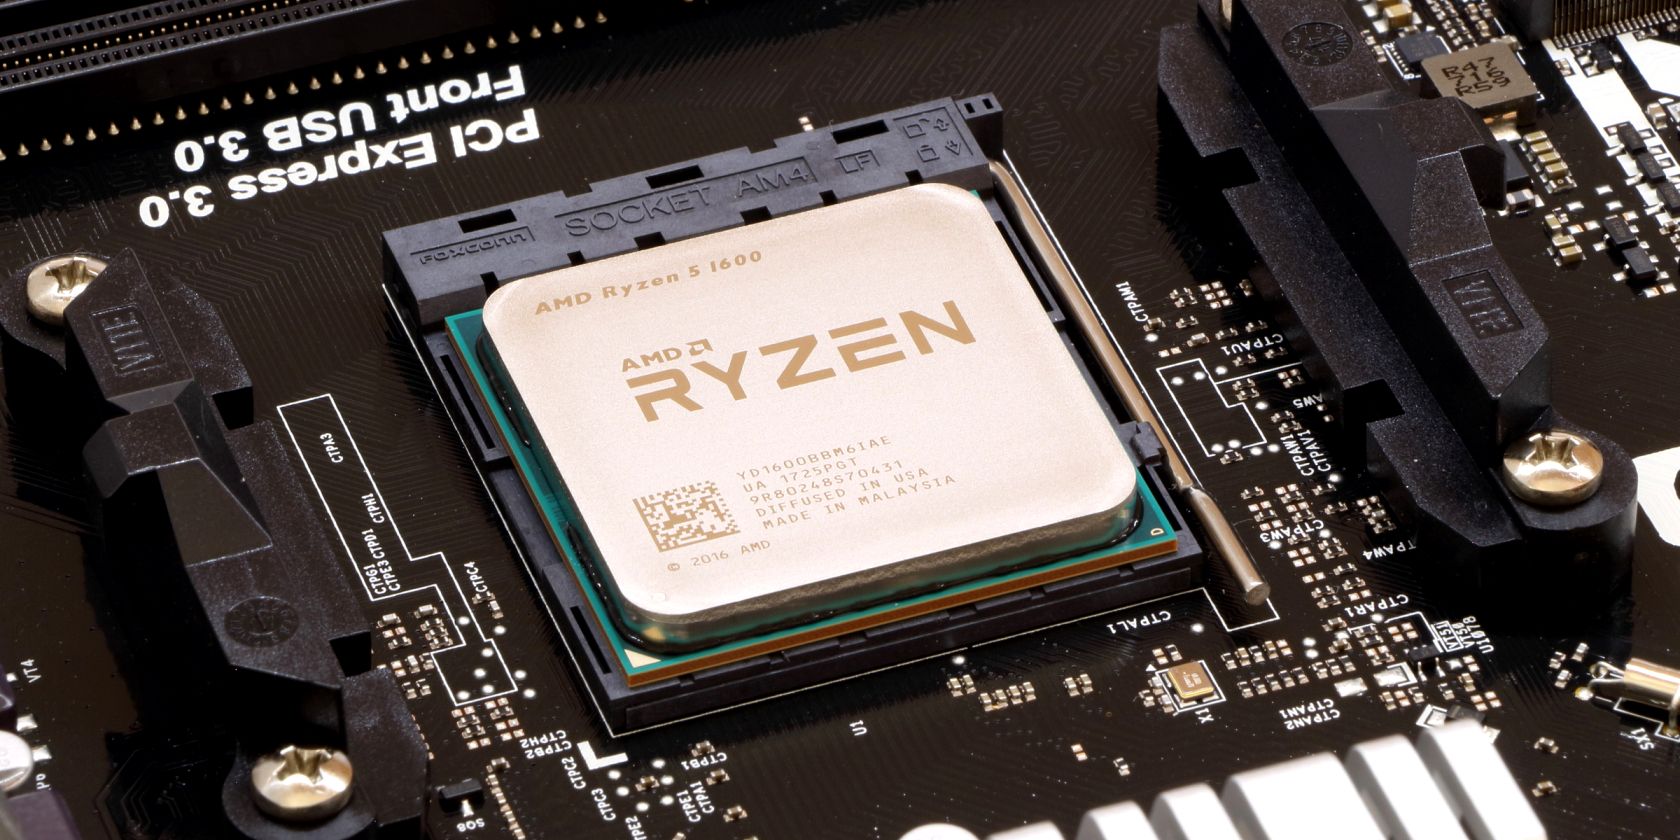 How Does AMD’s Ryzen 5 1600 Compare to Mainstream 0 CPUs?